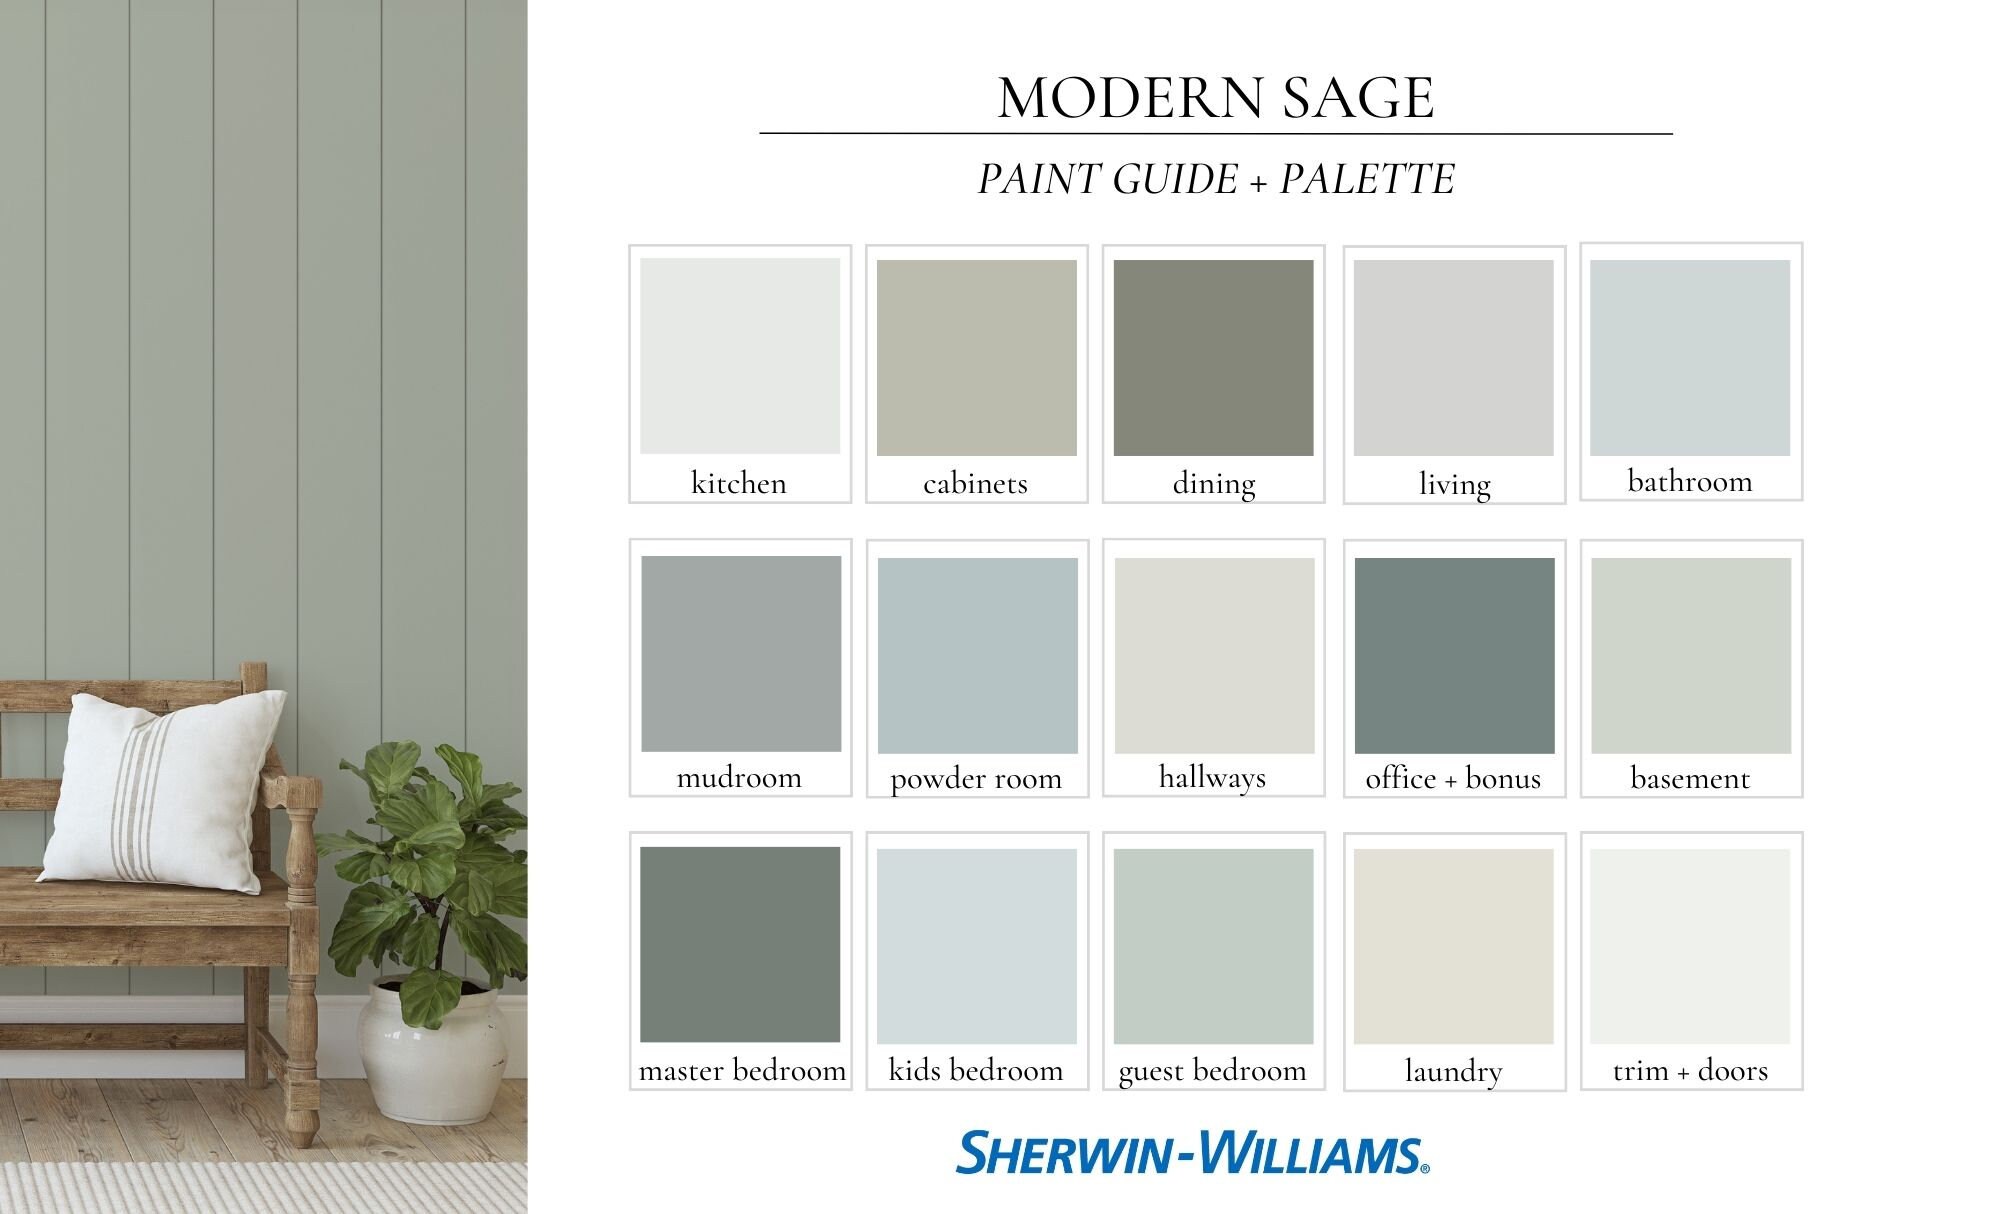 Shades of Green Interior Paint Palette, Whole Home Green Paint Colors,  Green Home Decor, Modern Interior Paint Colors for Whole Home 